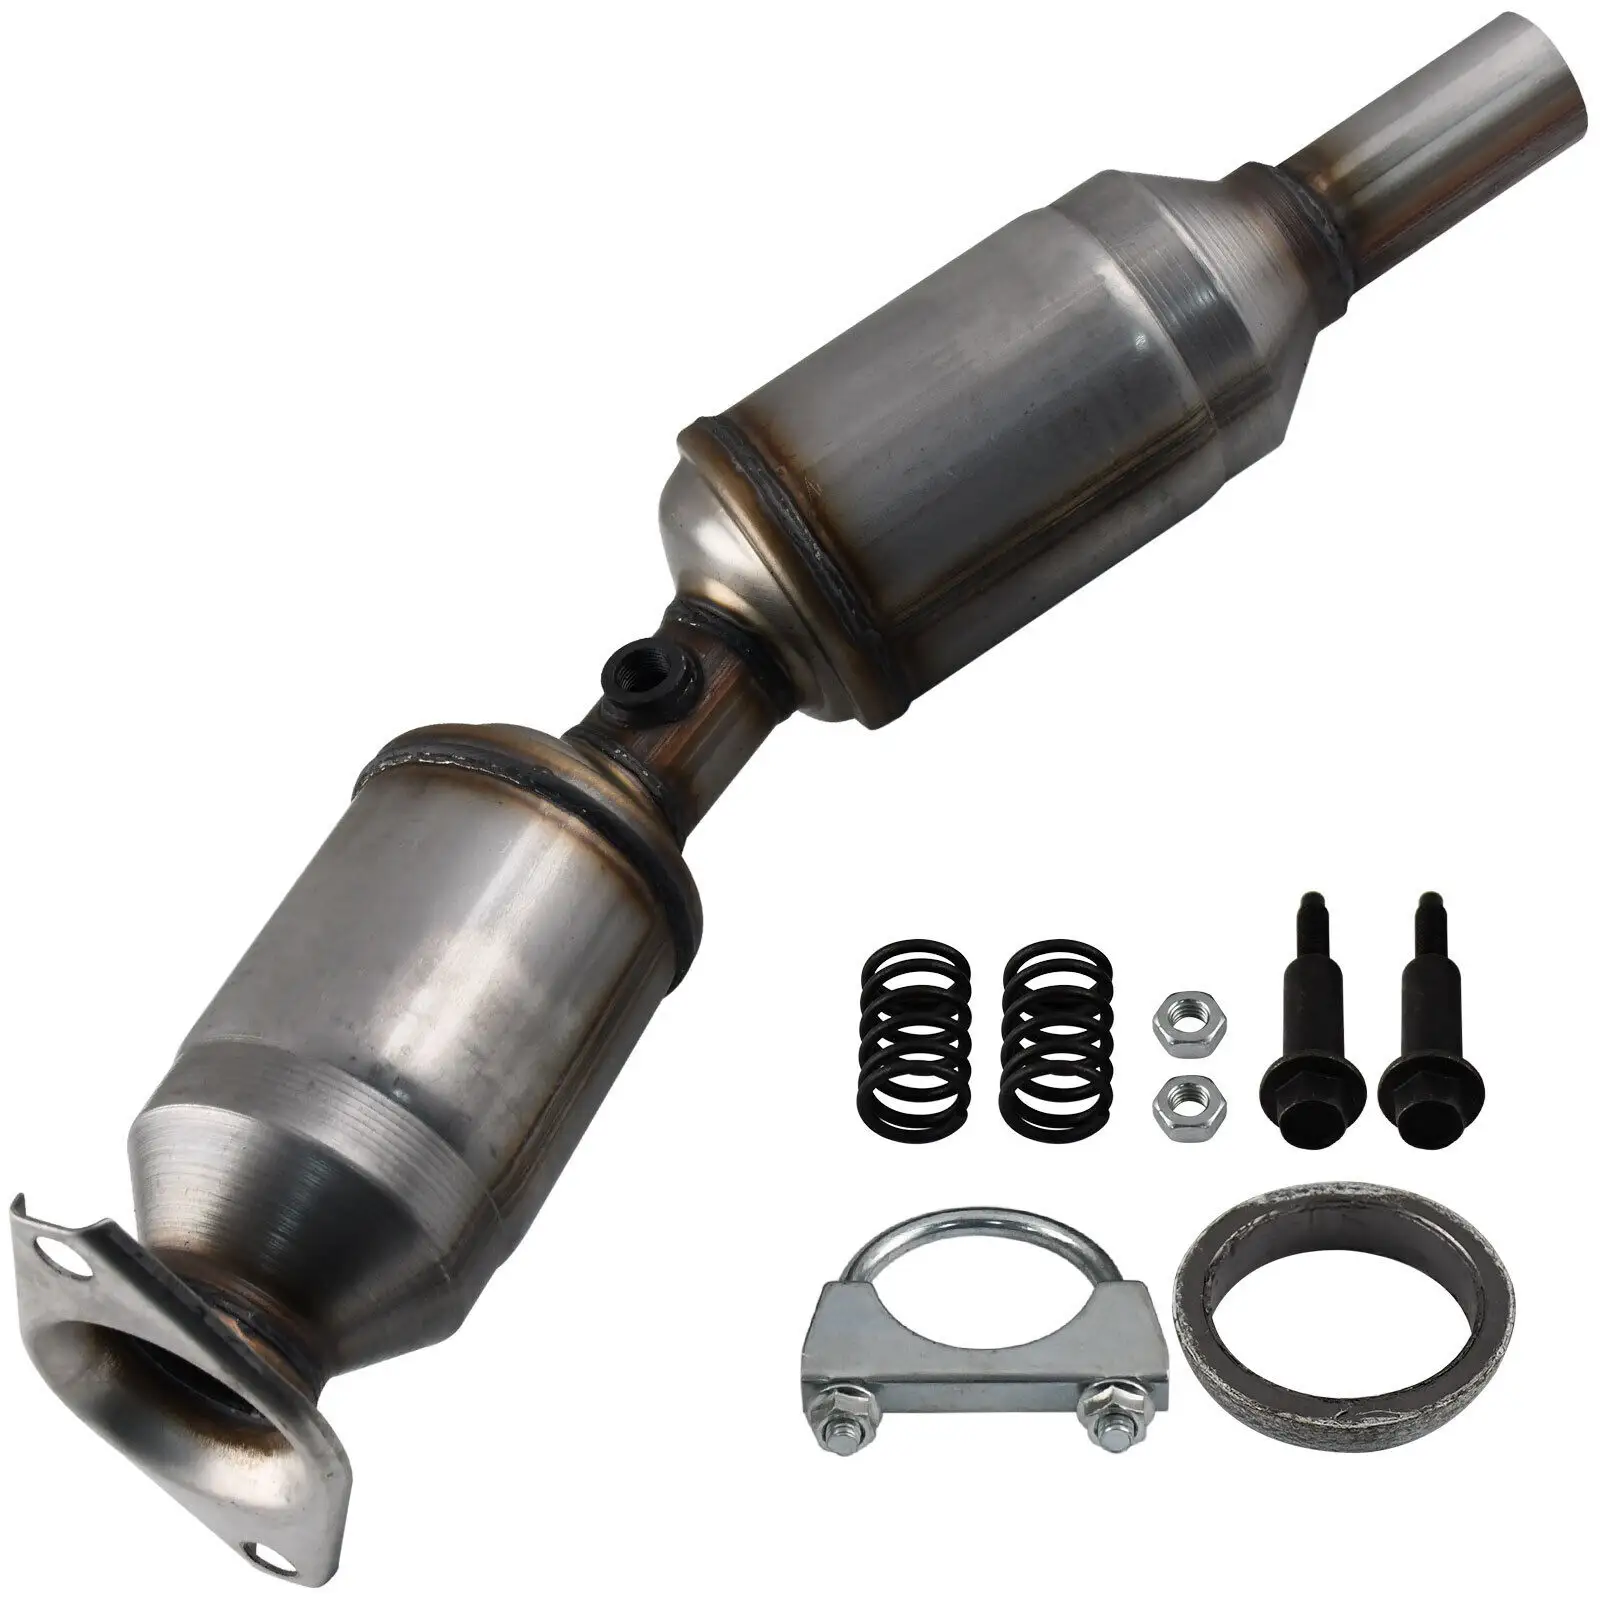 Auto Exhaust System Exhaust Stainless Steel Catalytic Converter 16649 For Toyota Prius Car Parts Catalytic Converter